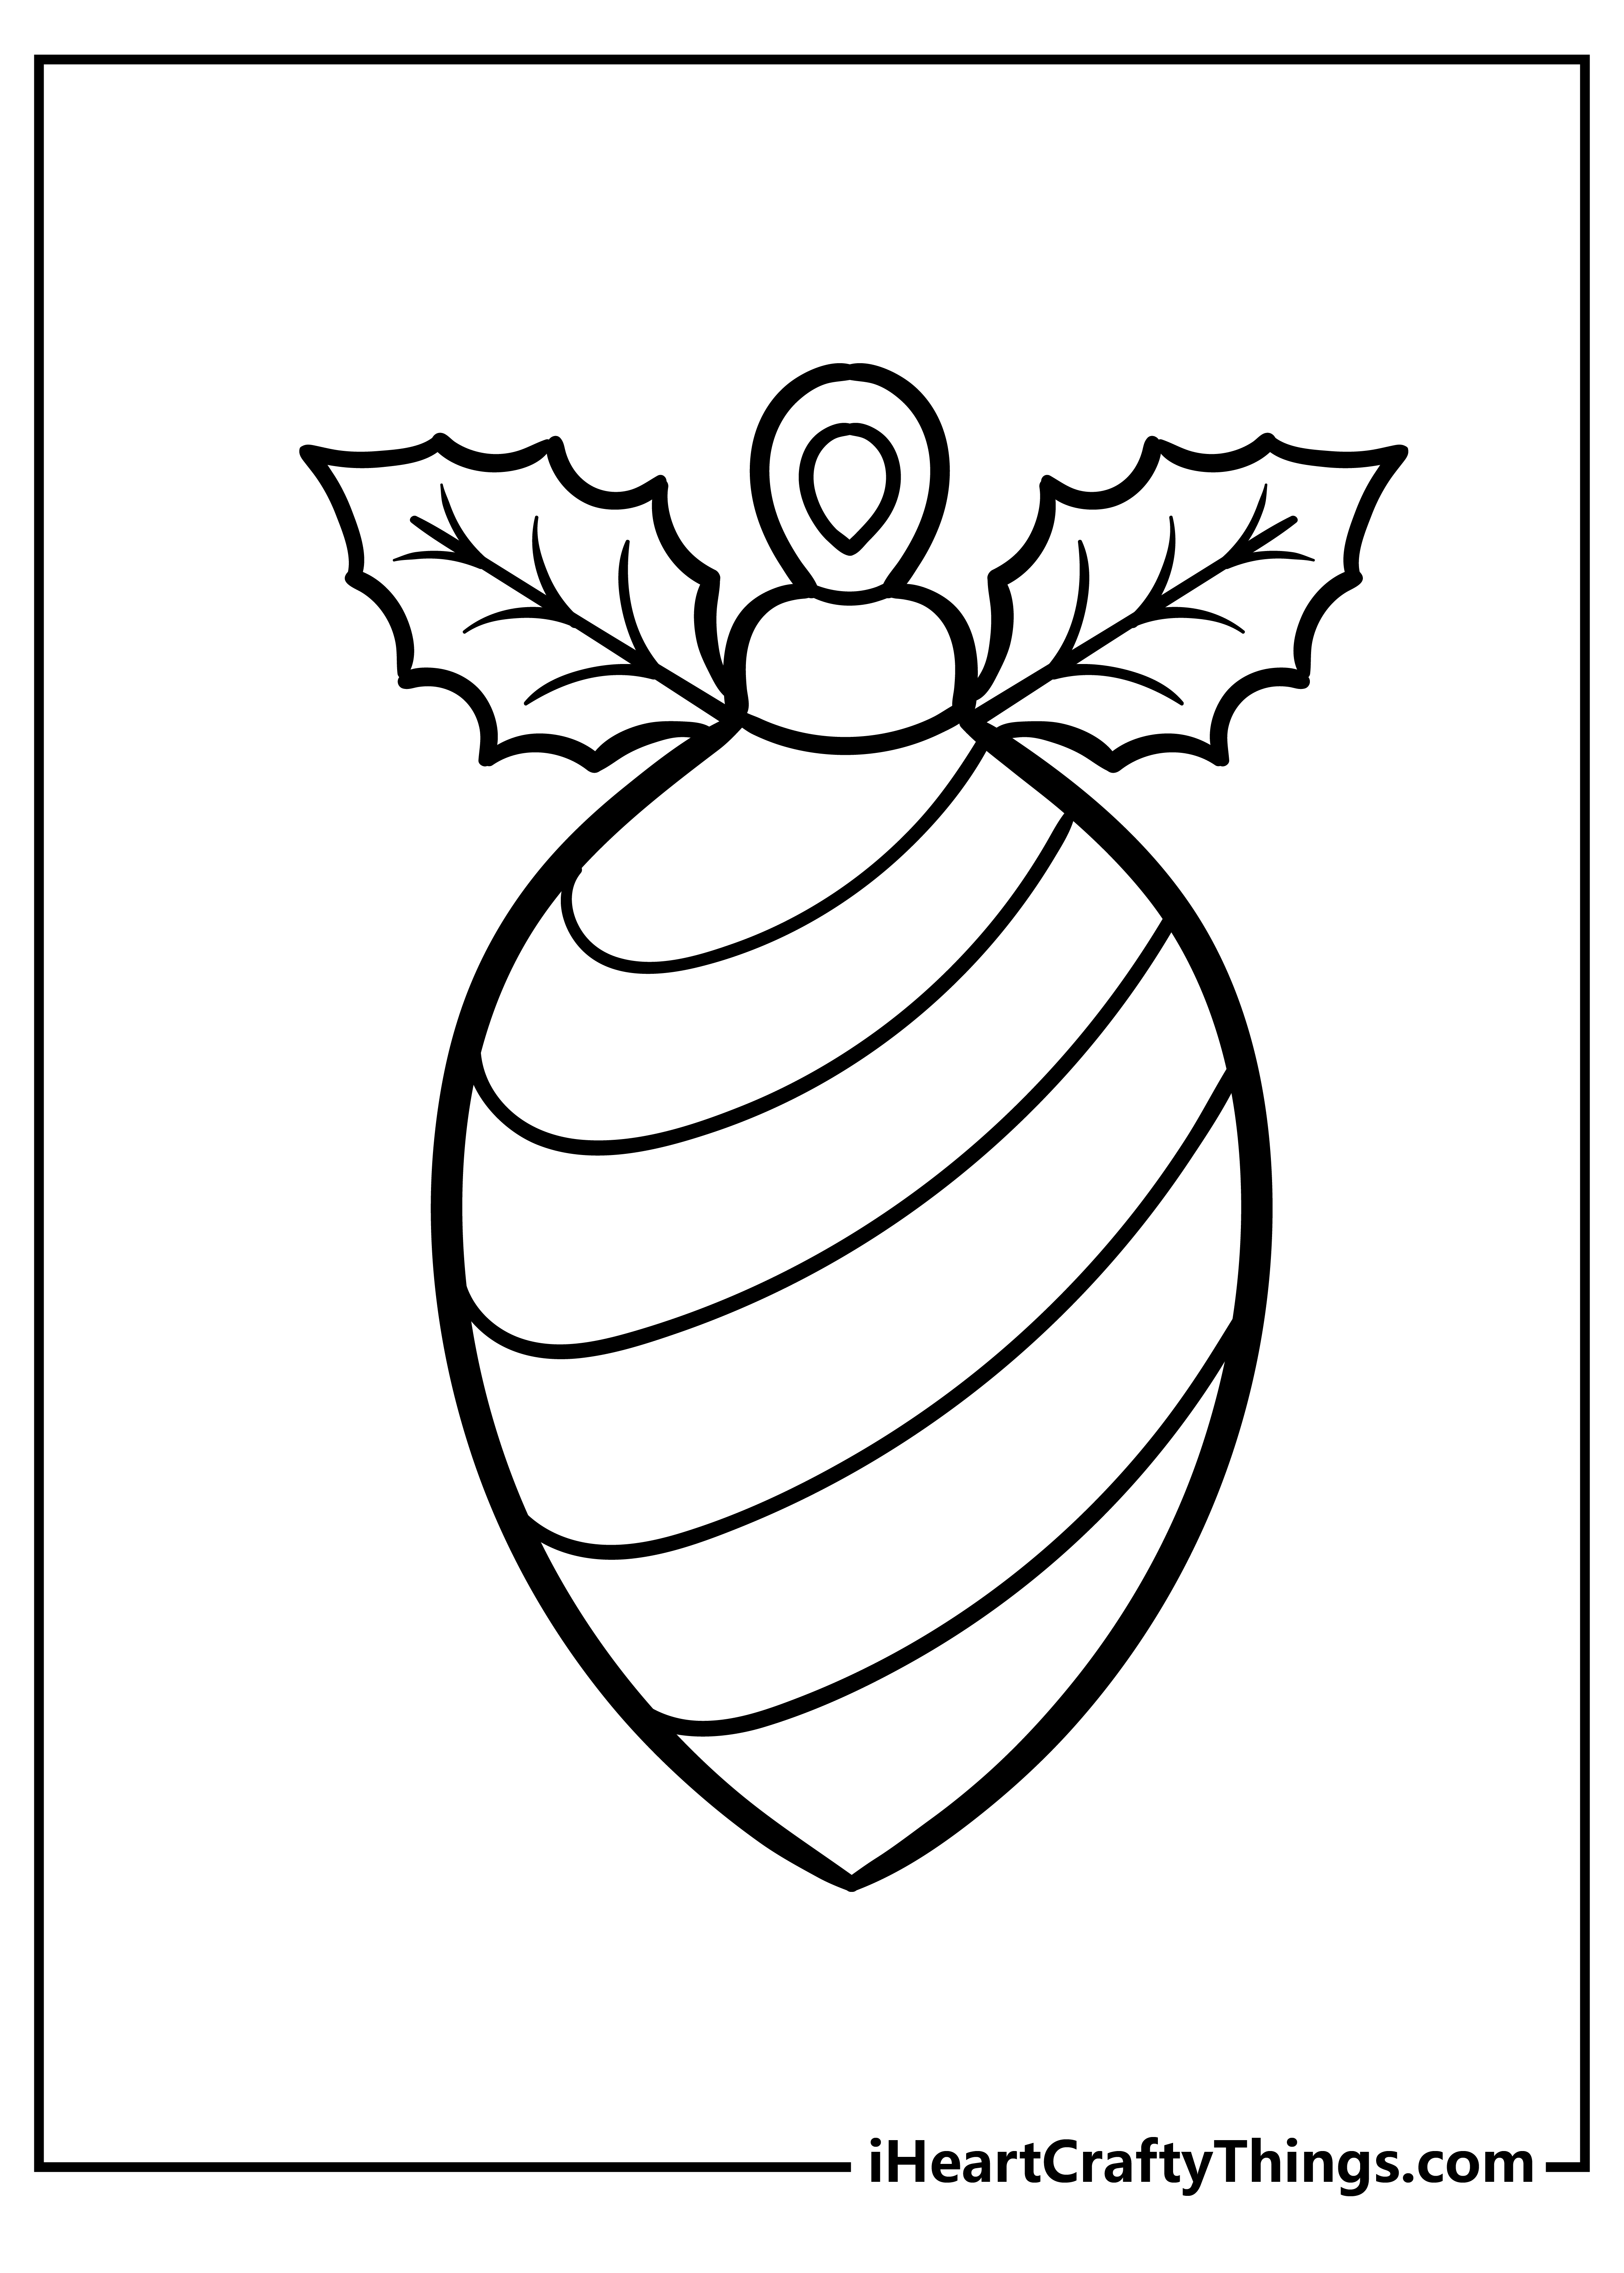 Free Printable Christmas Ornament Coloring Pages - Made In A Pinch